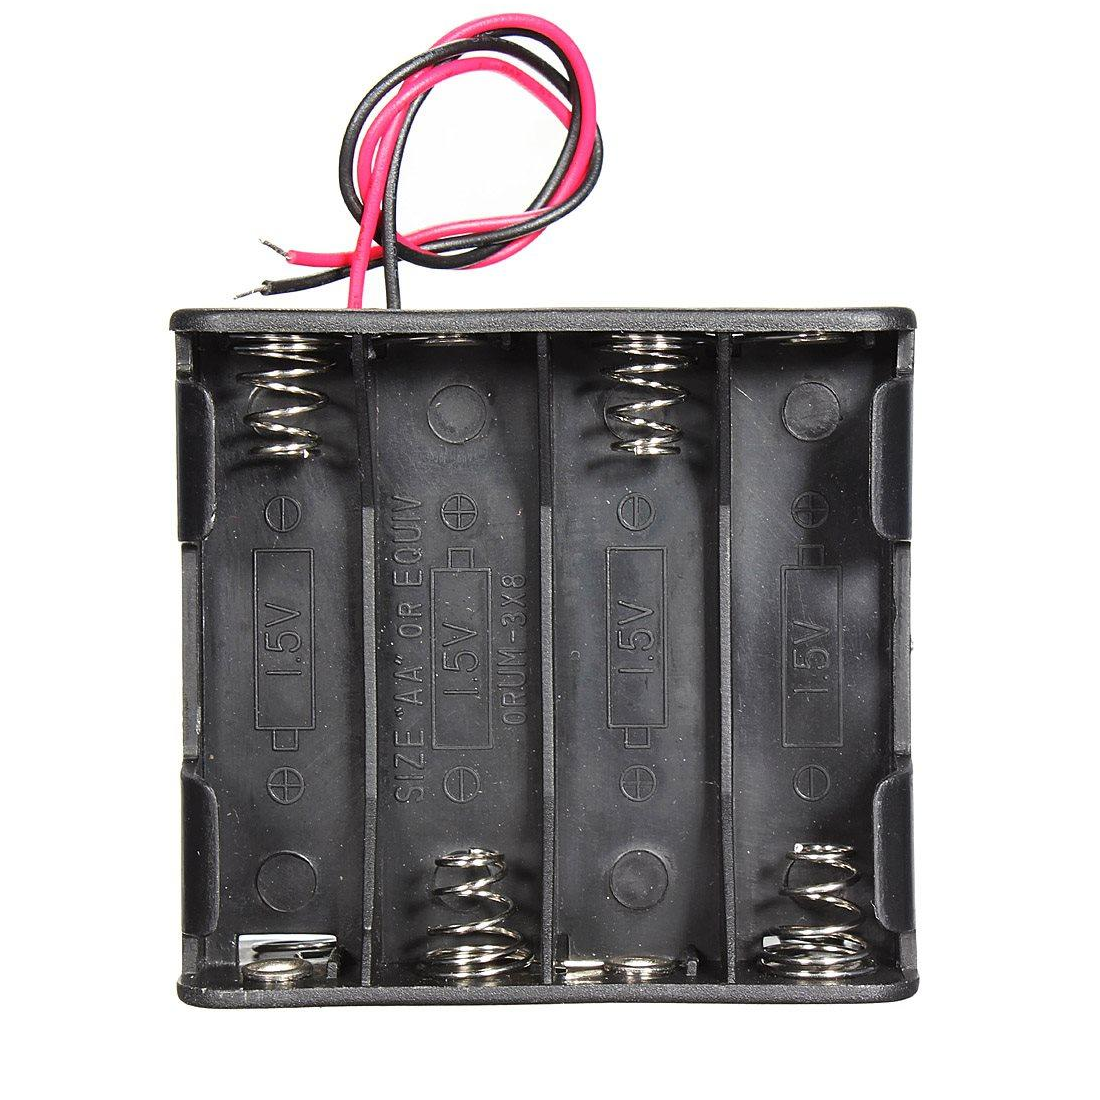 4 X Aa Battery Holder Box, Without Cover-2Pcs